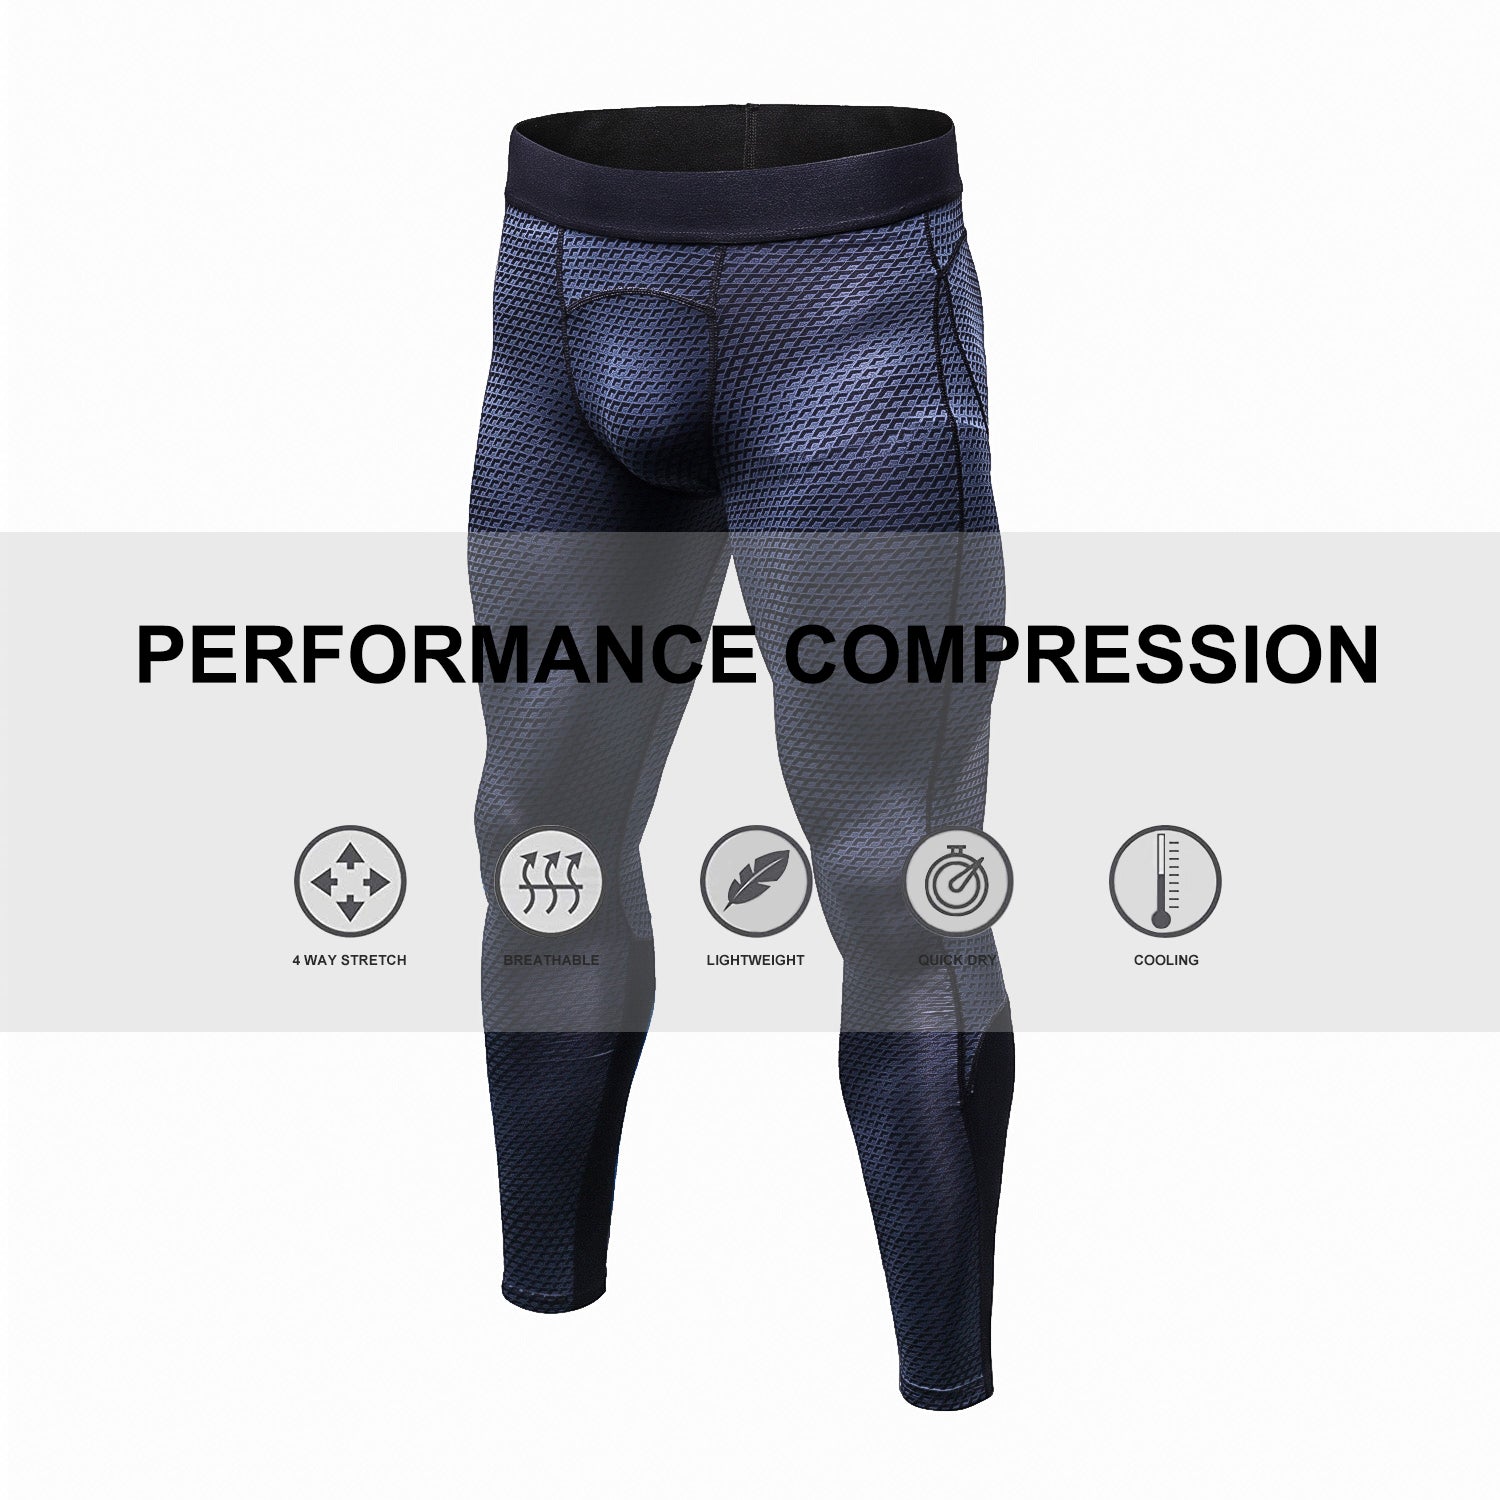 Buy OEBLD Compression Pants Men UV Blocking Running Tights 1 or 2 Pack Gym  Yoga Leggings for Athletic Workout, Black Pants, Medium at Amazon.in